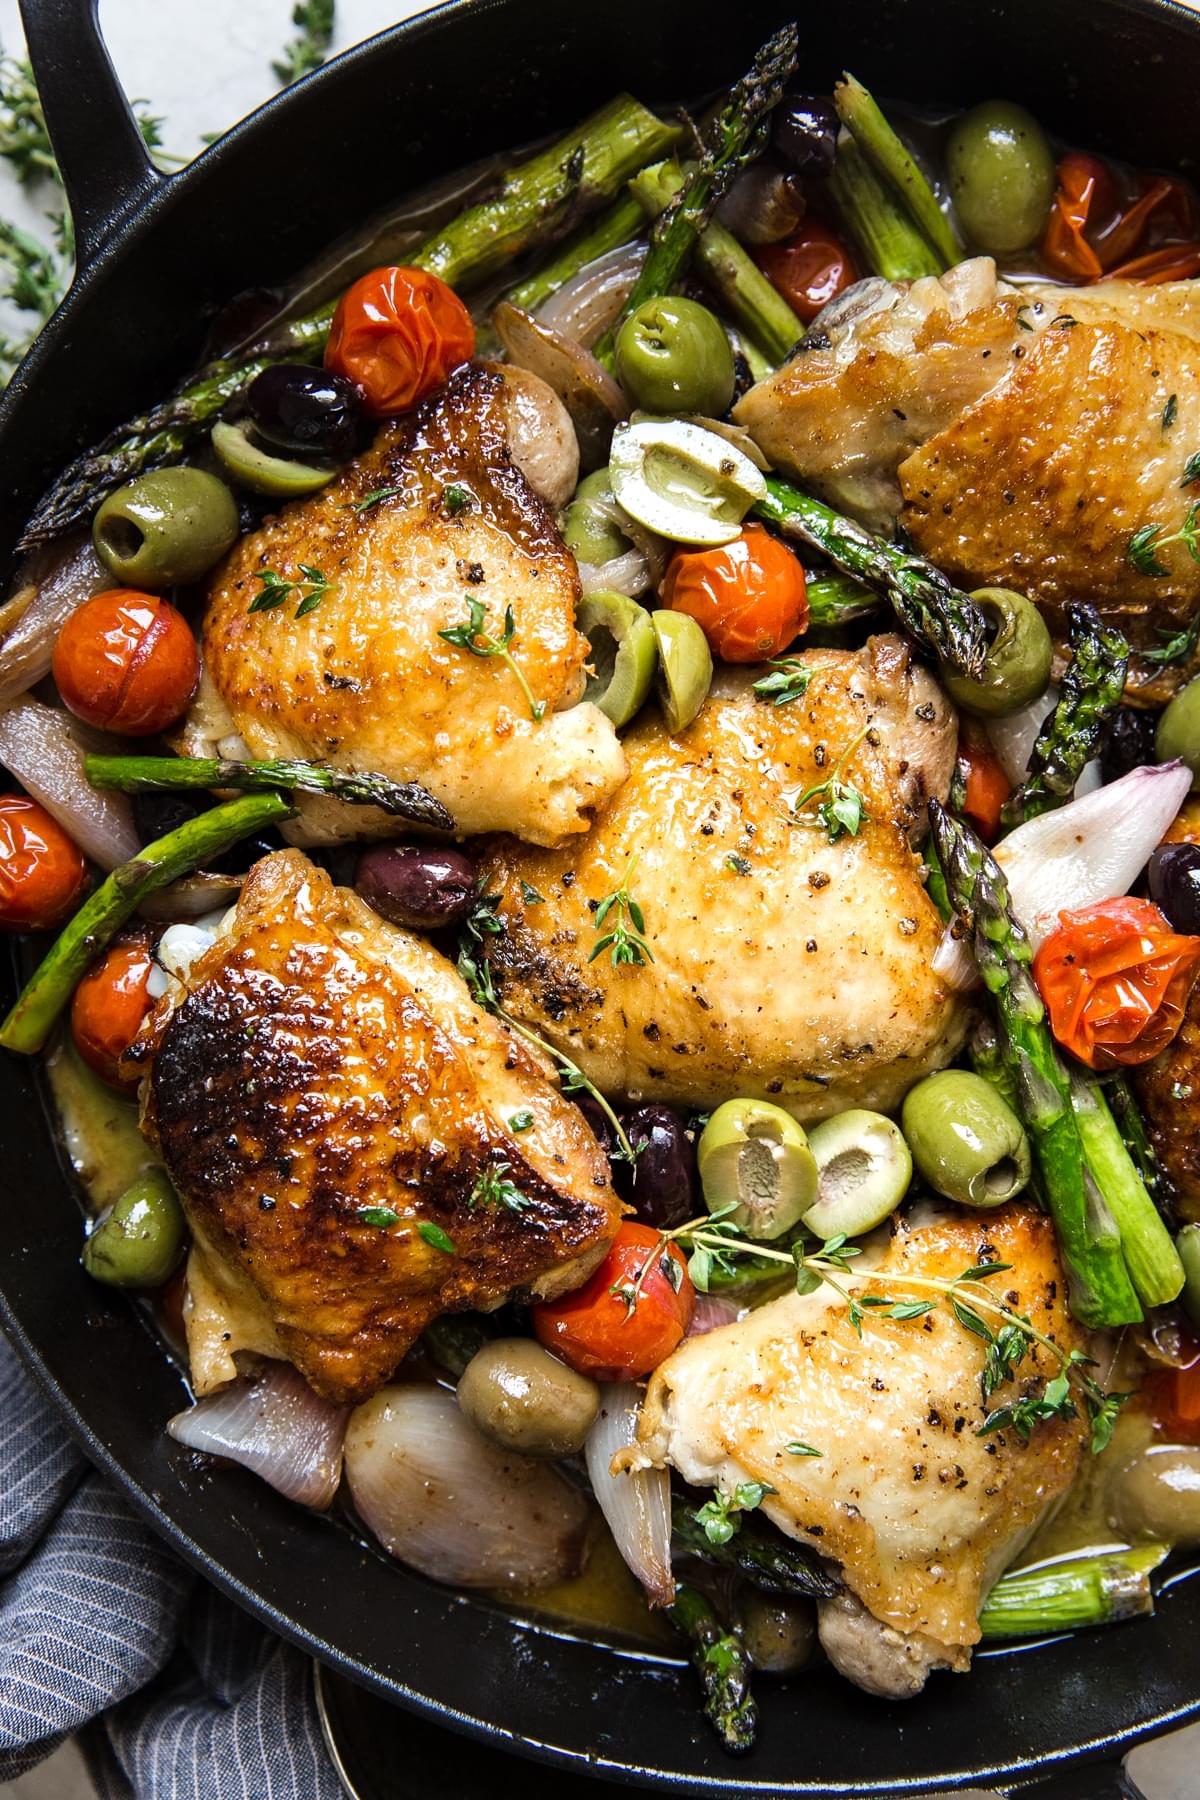 Baked Chicken Thighs With Asparagus in a pan with olives, tomatoes and shallots in a white wine garlic sauce.